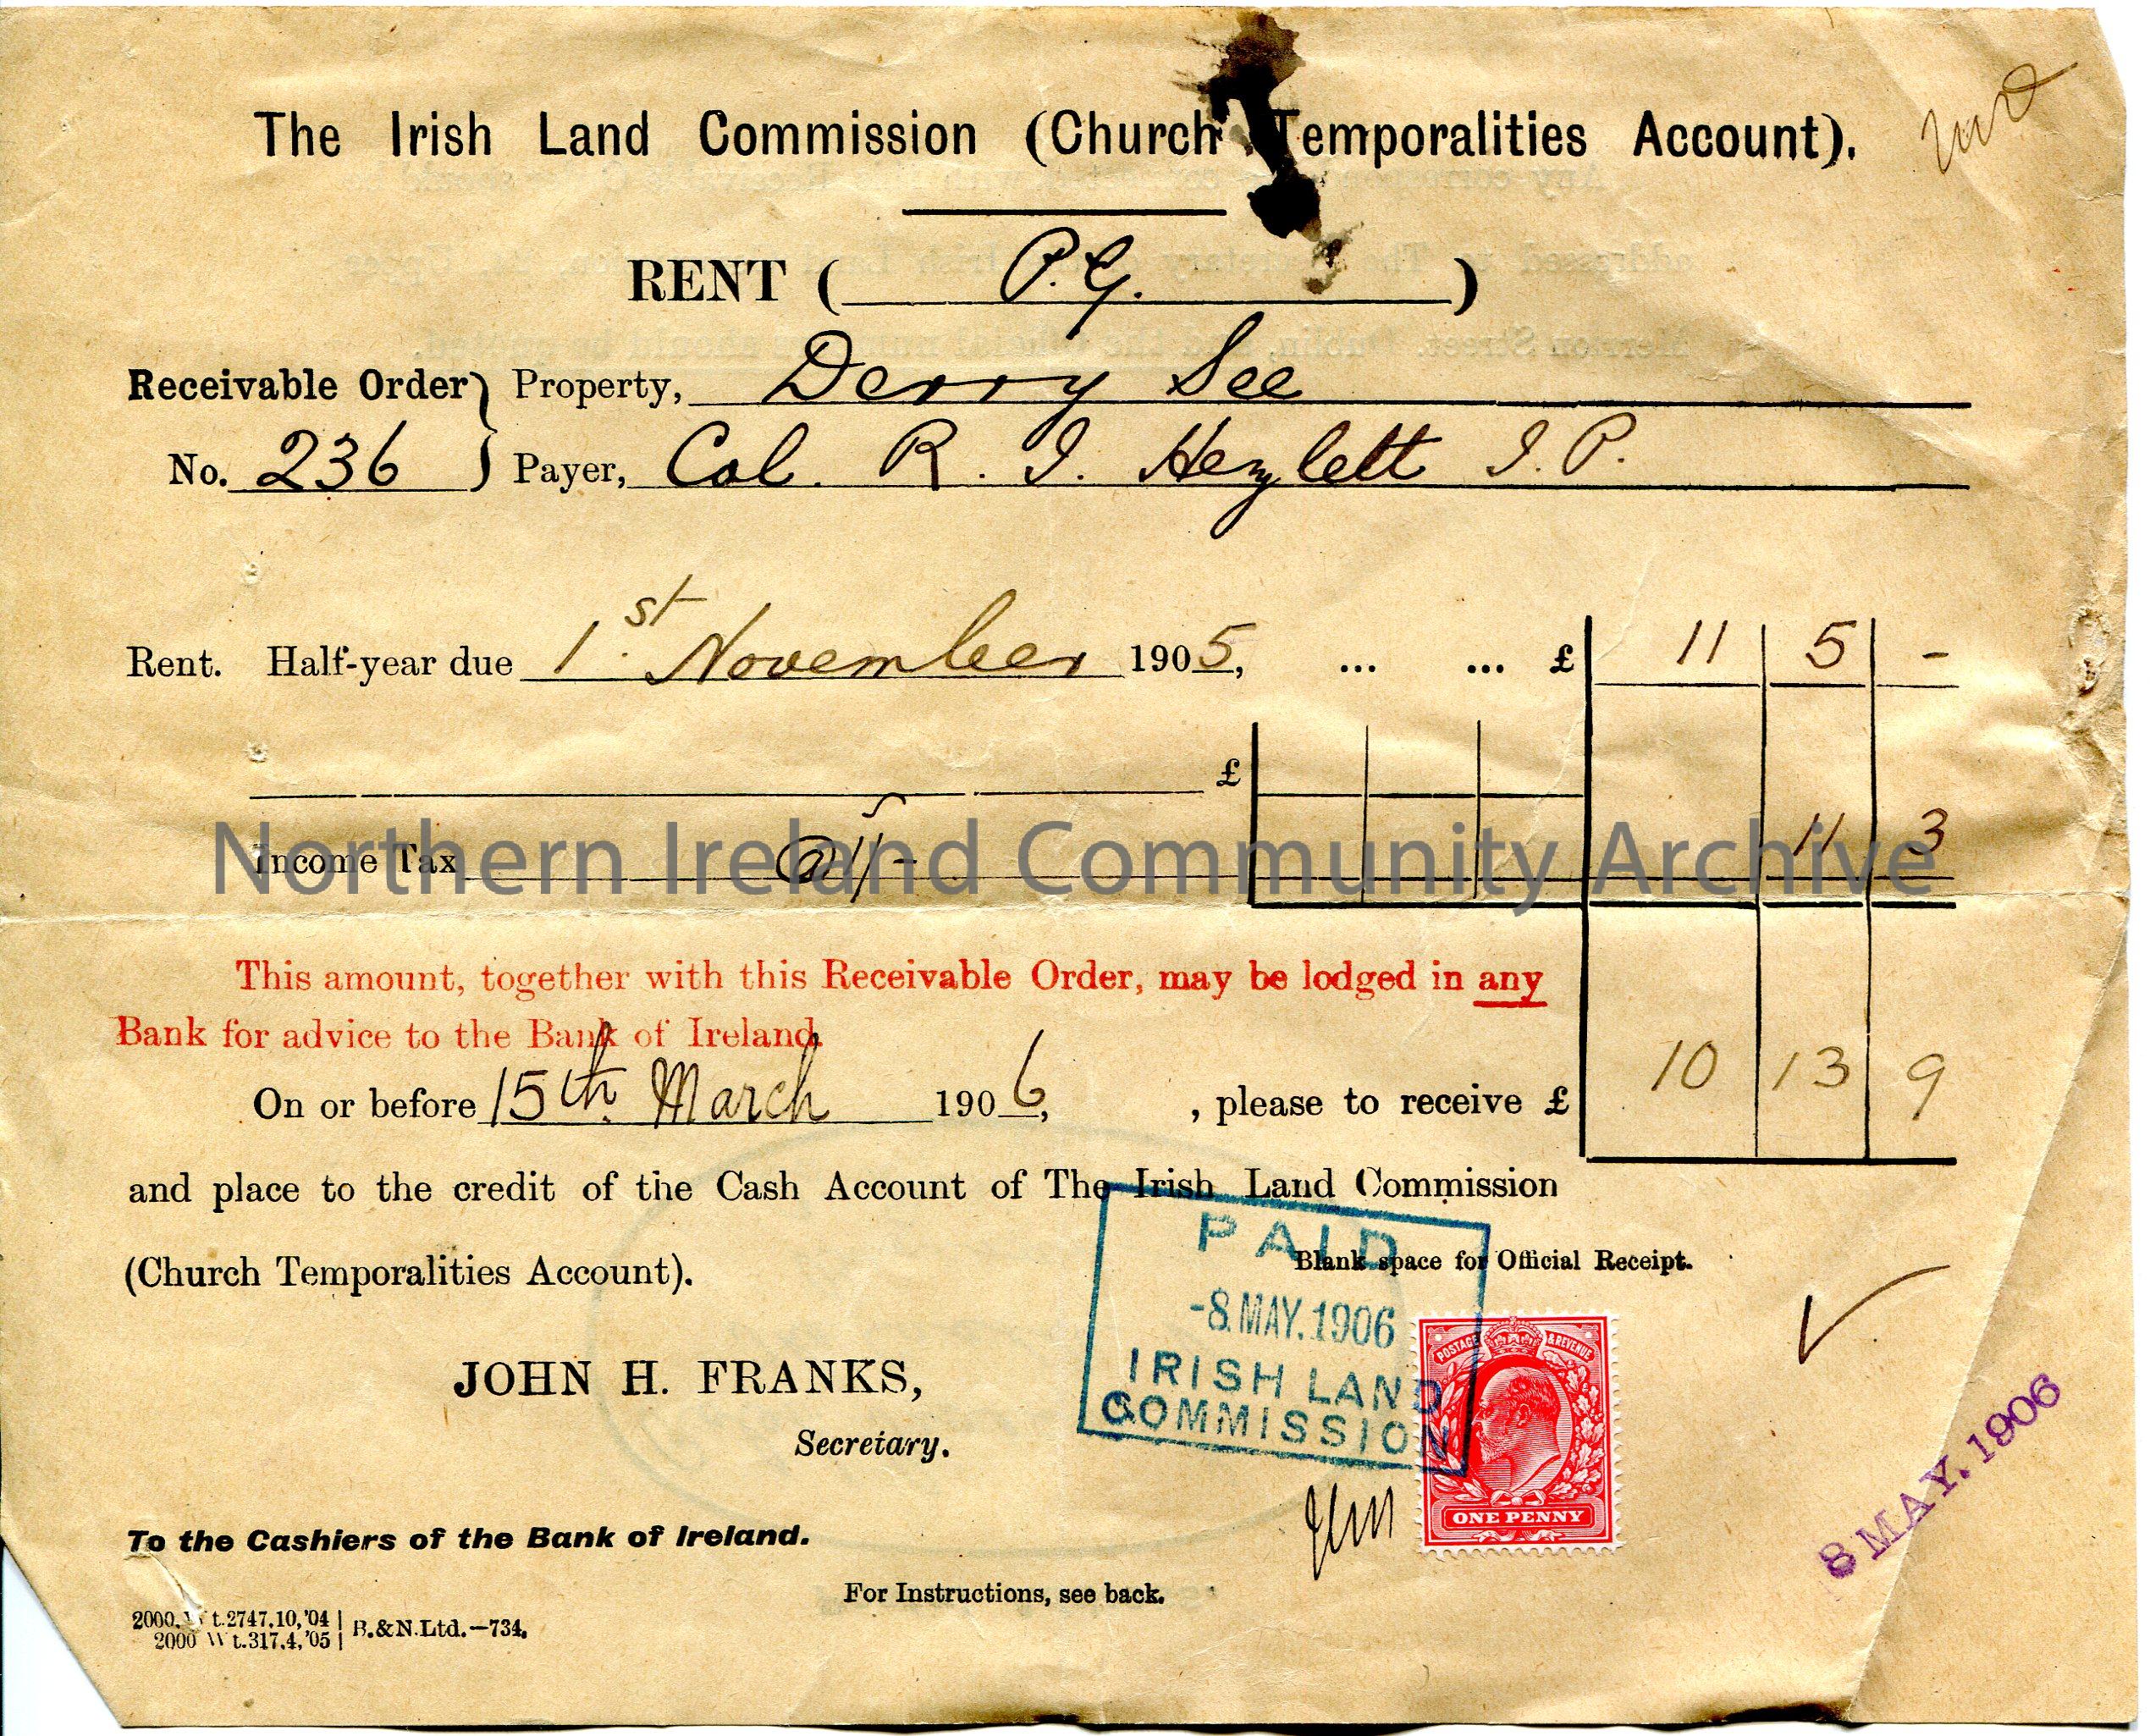 Handwritten receipt for payment into the Cash Account of The Irish Land Commission. Receivable Order No. 236. Property – Derry See. Payer – Col. R. J….